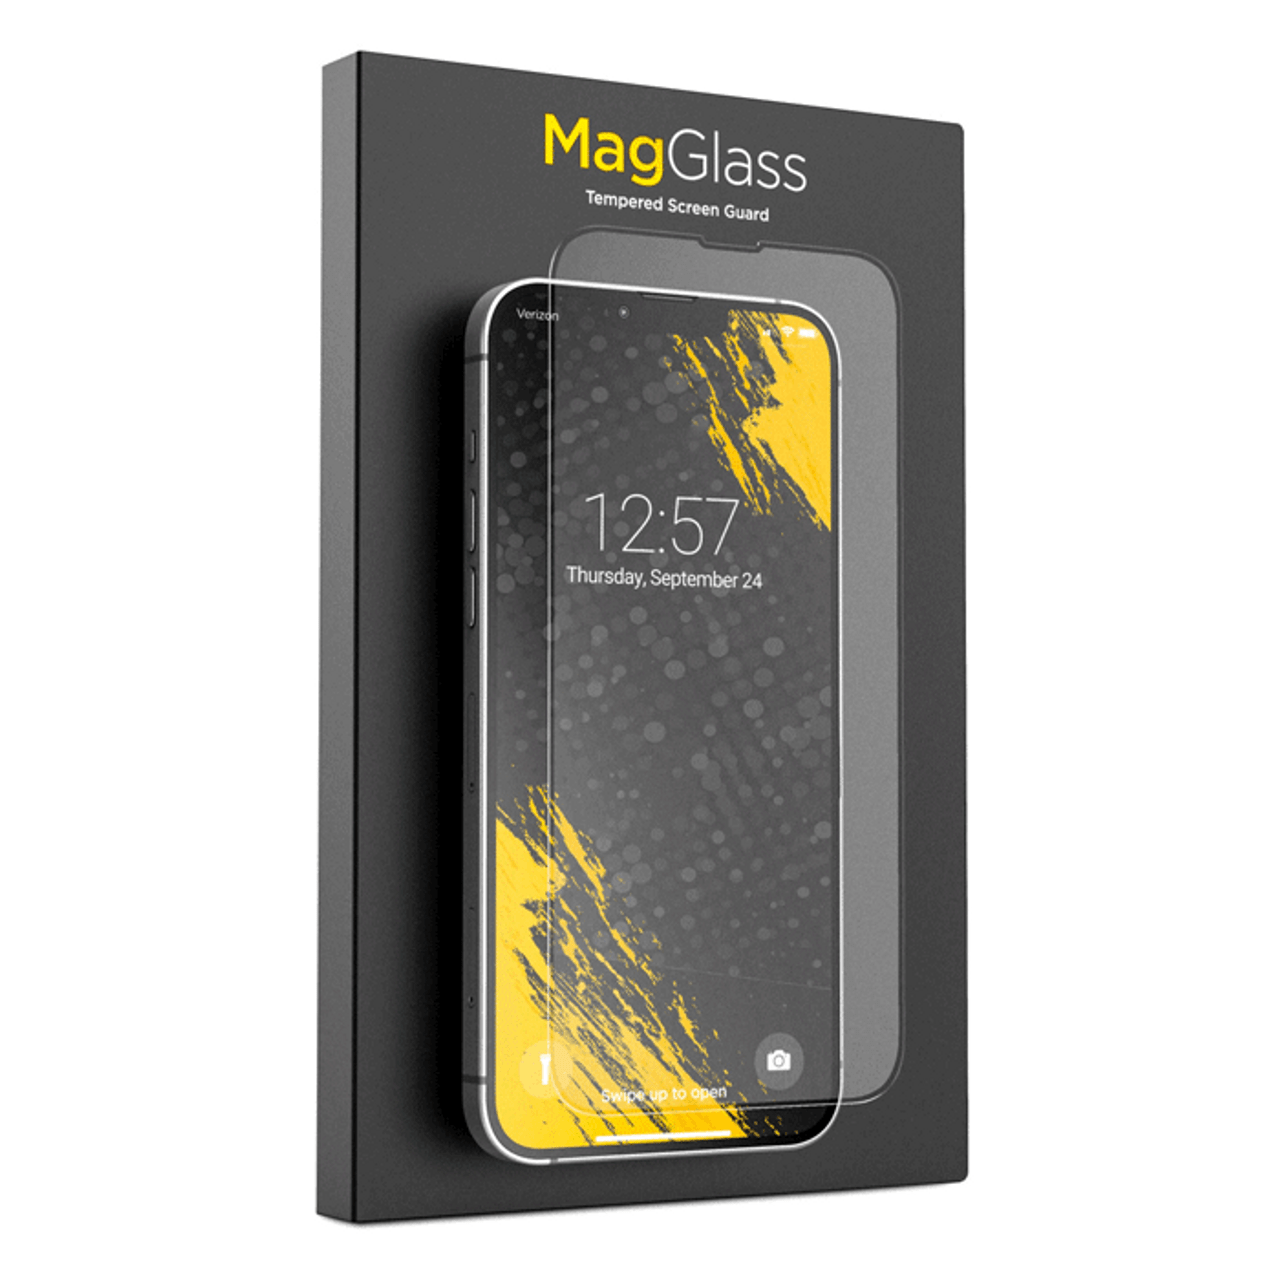 iPad Mini 5 Case Compatible Magglass Tempered Glass Clear - Encased